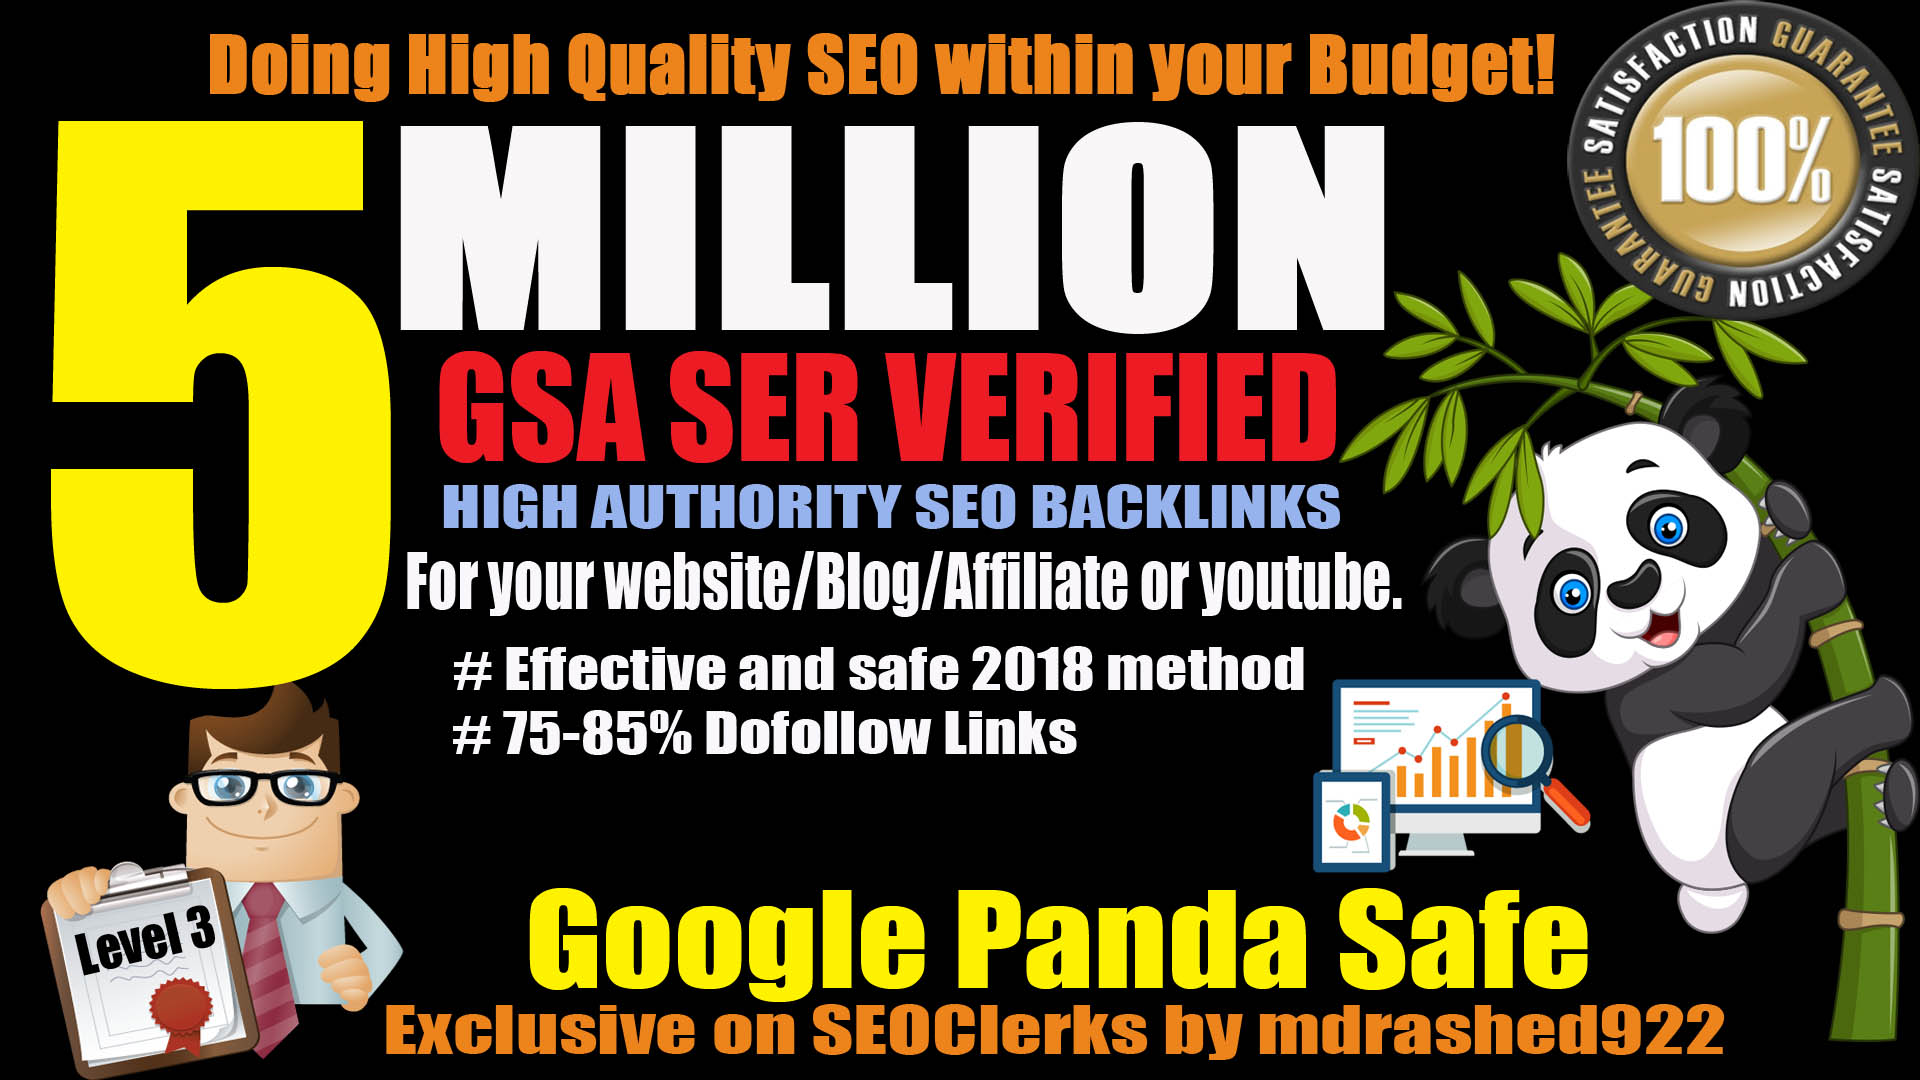 Rank on Google 1st Page with 5 million GSA SER Verified High Authority SEO Backlinks for your Website/Blog/Affiliate or YouTube